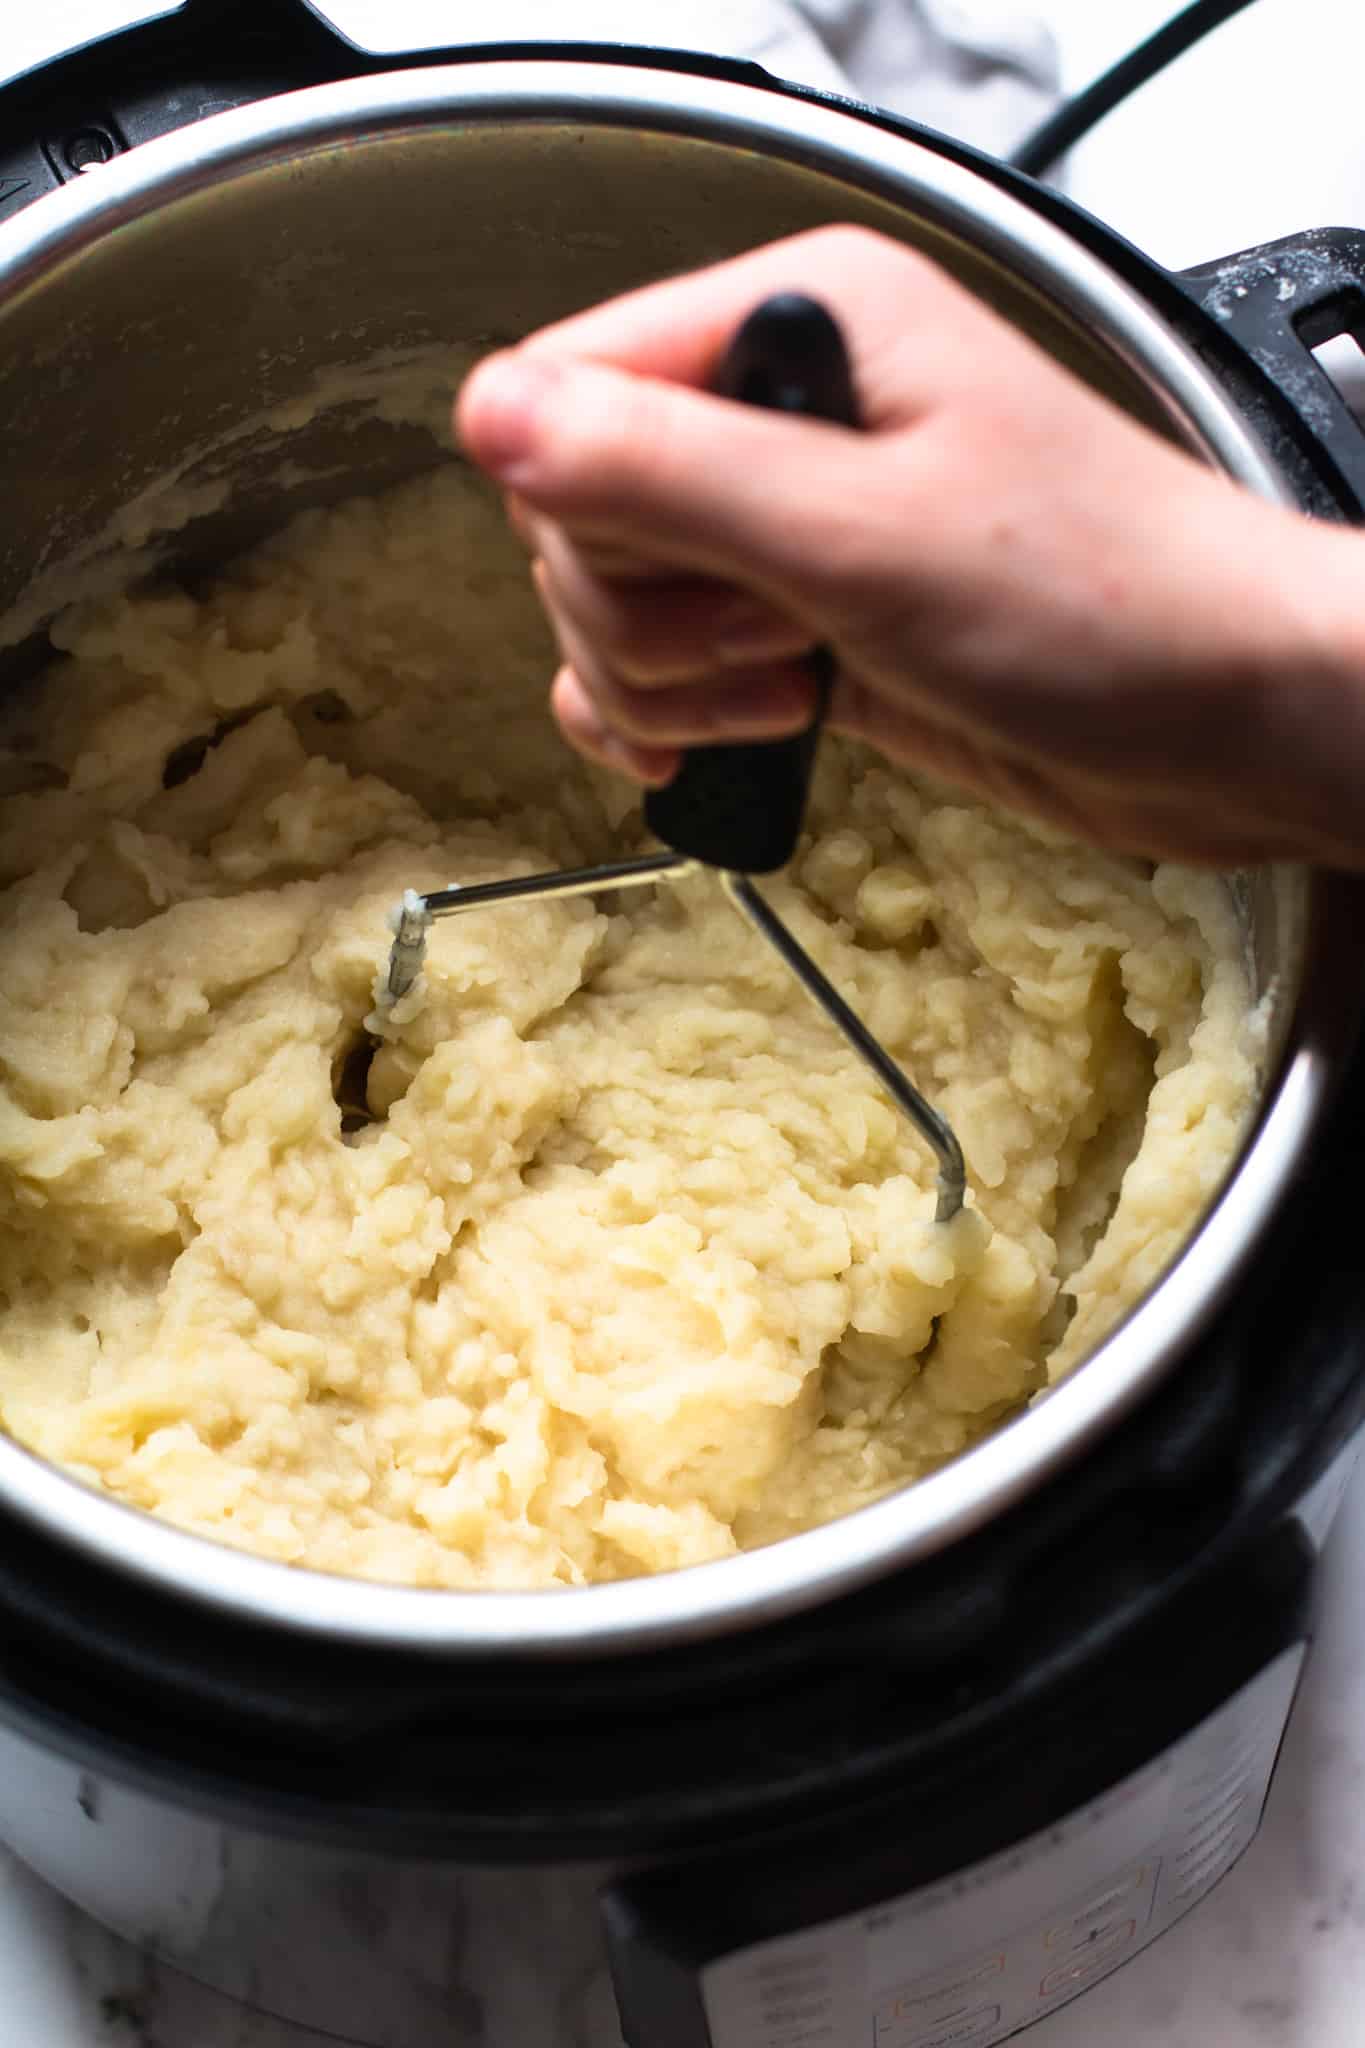 Mashed potatoes in an Instant Pot